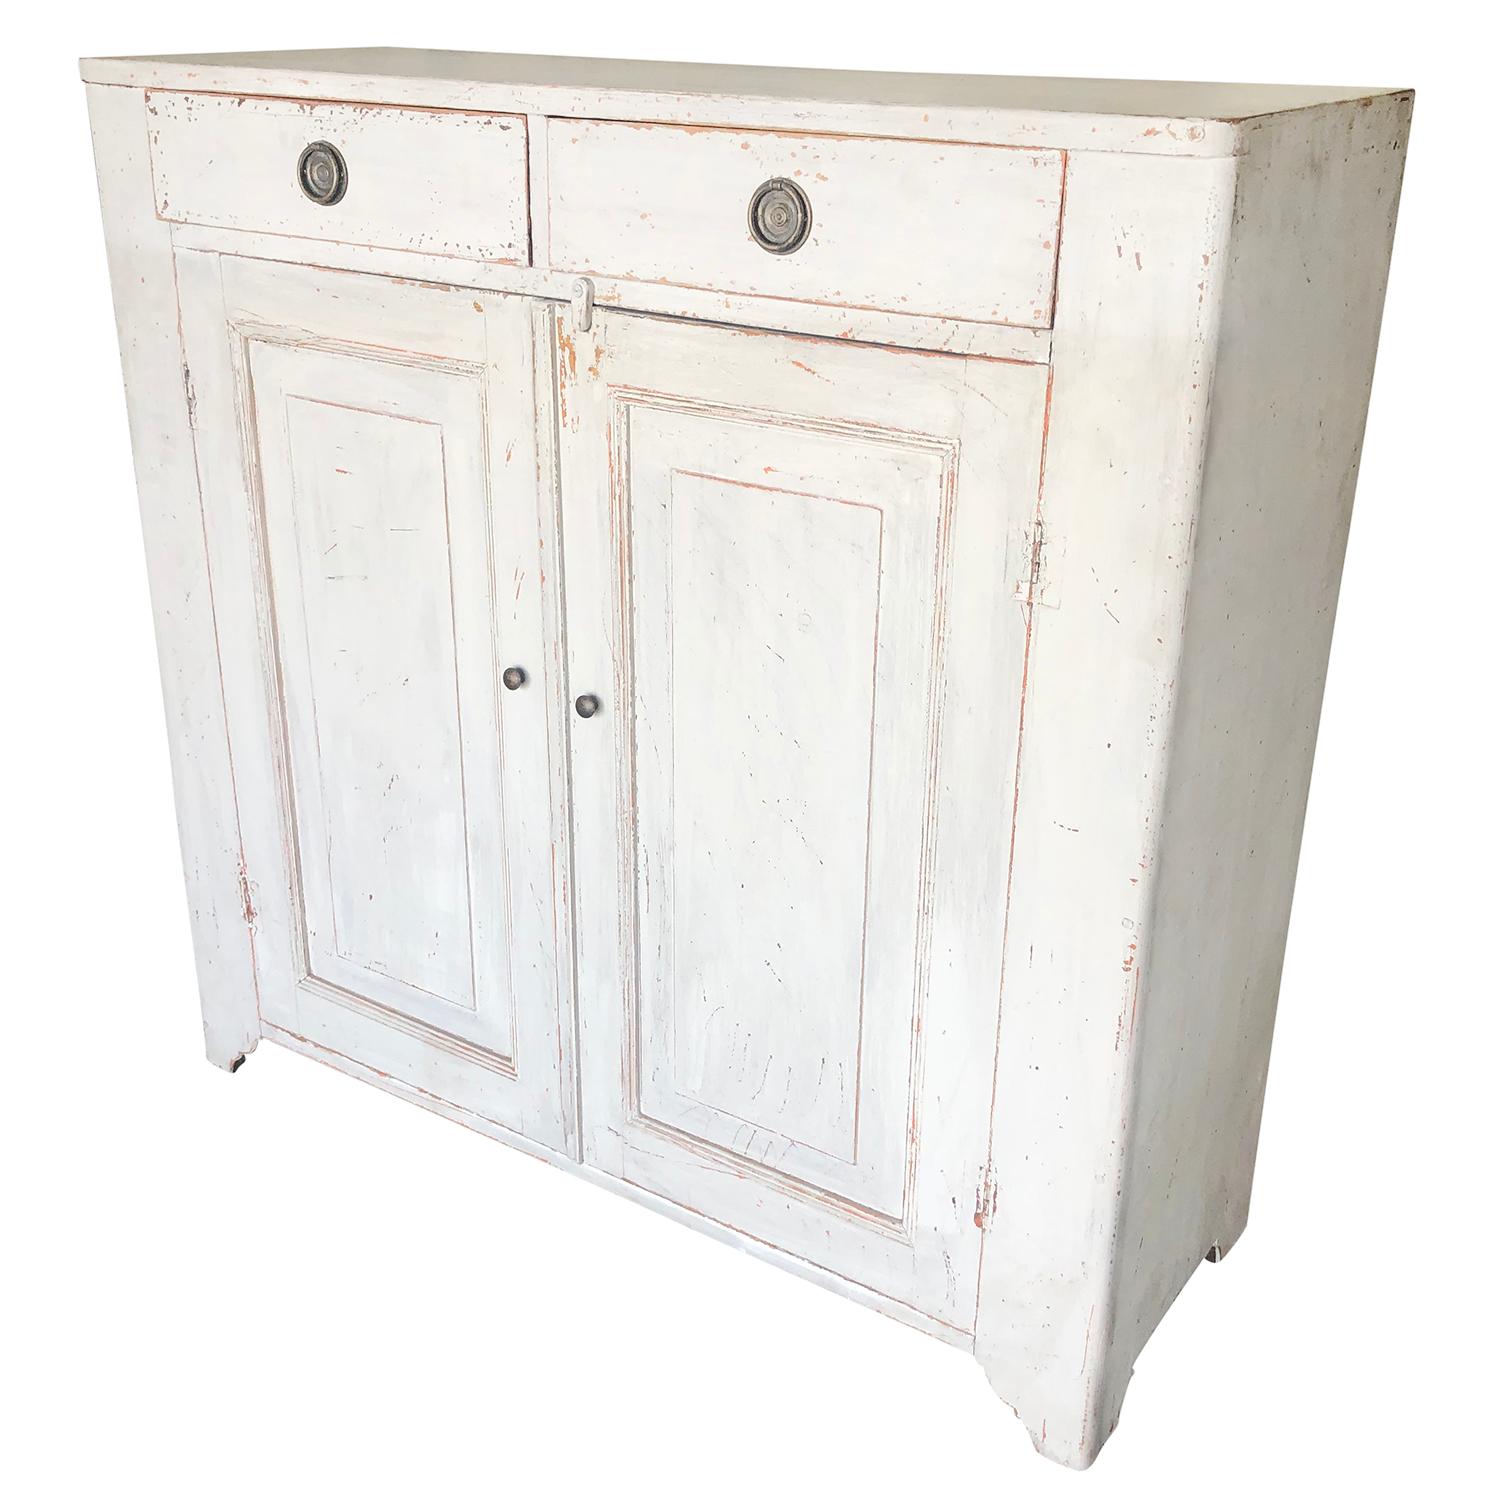 An antique Swedish Gustavian sideboard made of hand carved Pinewood and chrome, comprised of two doors with raised panels. Refreshed white-grey finish, detailed in the neoclassical Greek style with their original hardware, in good condition. Wear